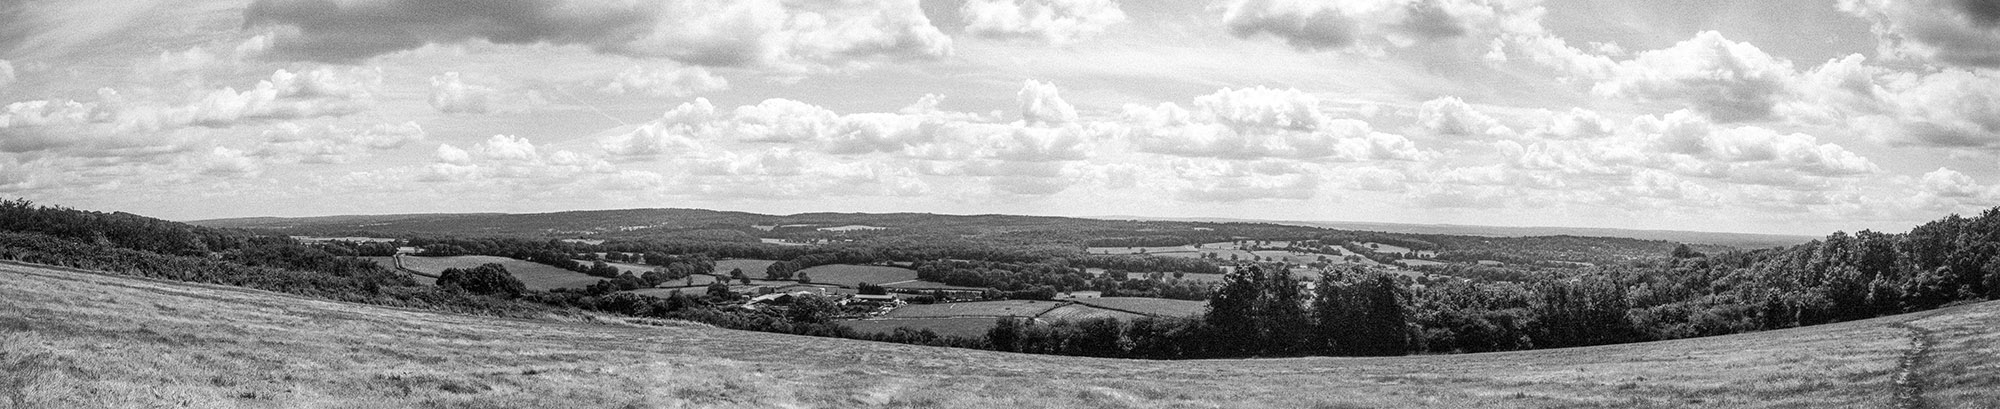 EZ400 exposed at 800, stitched from 4 frames - Leica M6, Summicron 35